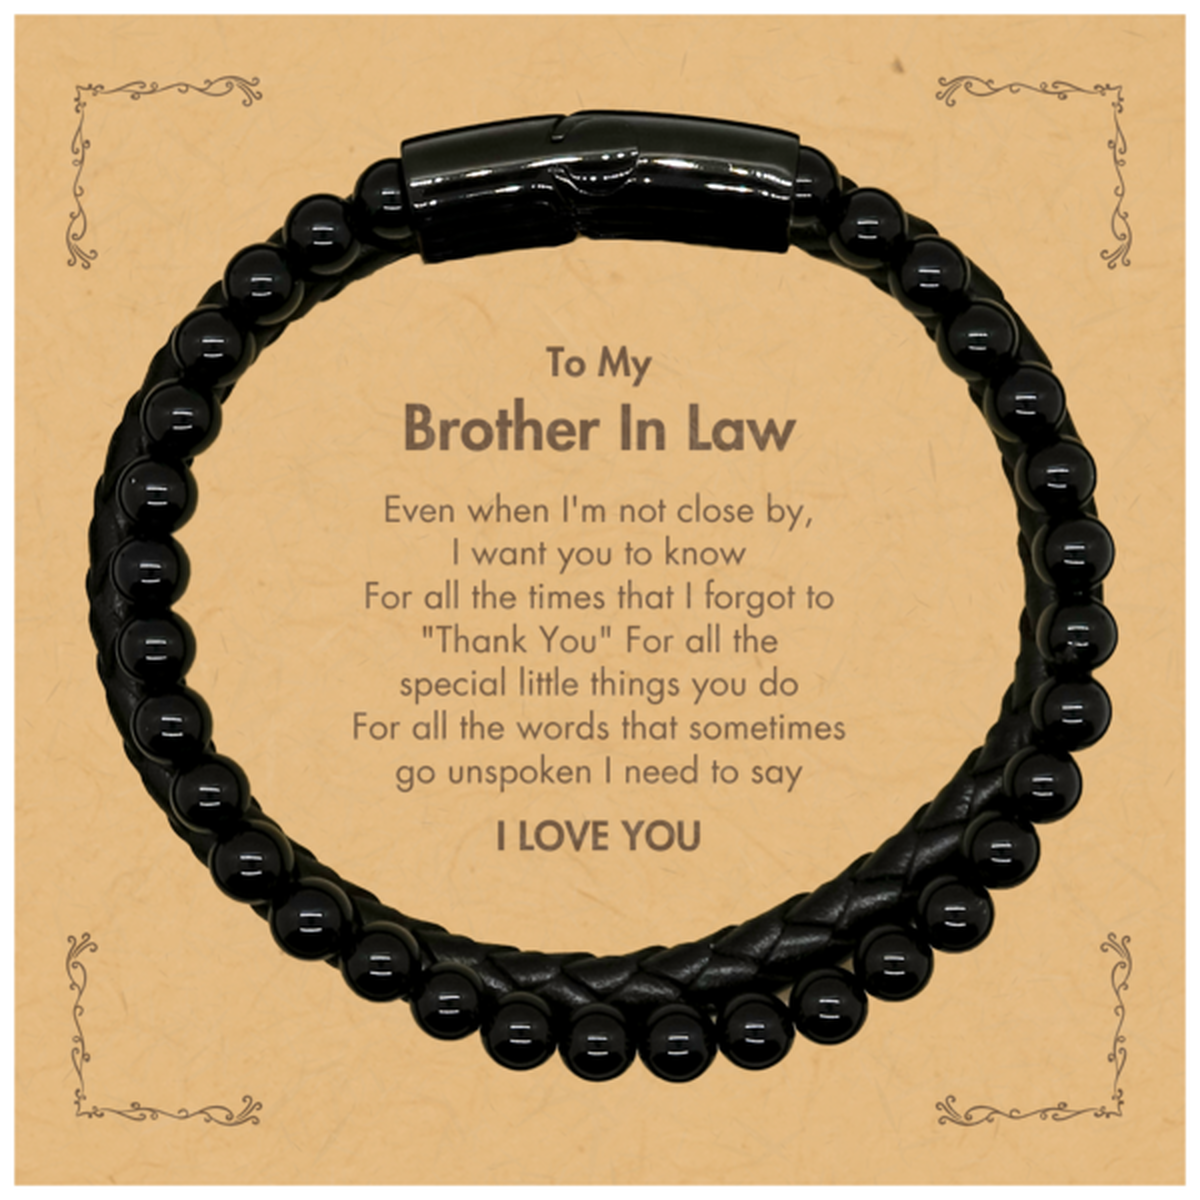 Thank You Gifts for Brother In Law, Keepsake Stone Leather Bracelets Gifts for Brother In Law Birthday Mother's day Father's Day Brother In Law For all the words That sometimes go unspoken I need to say I LOVE YOU